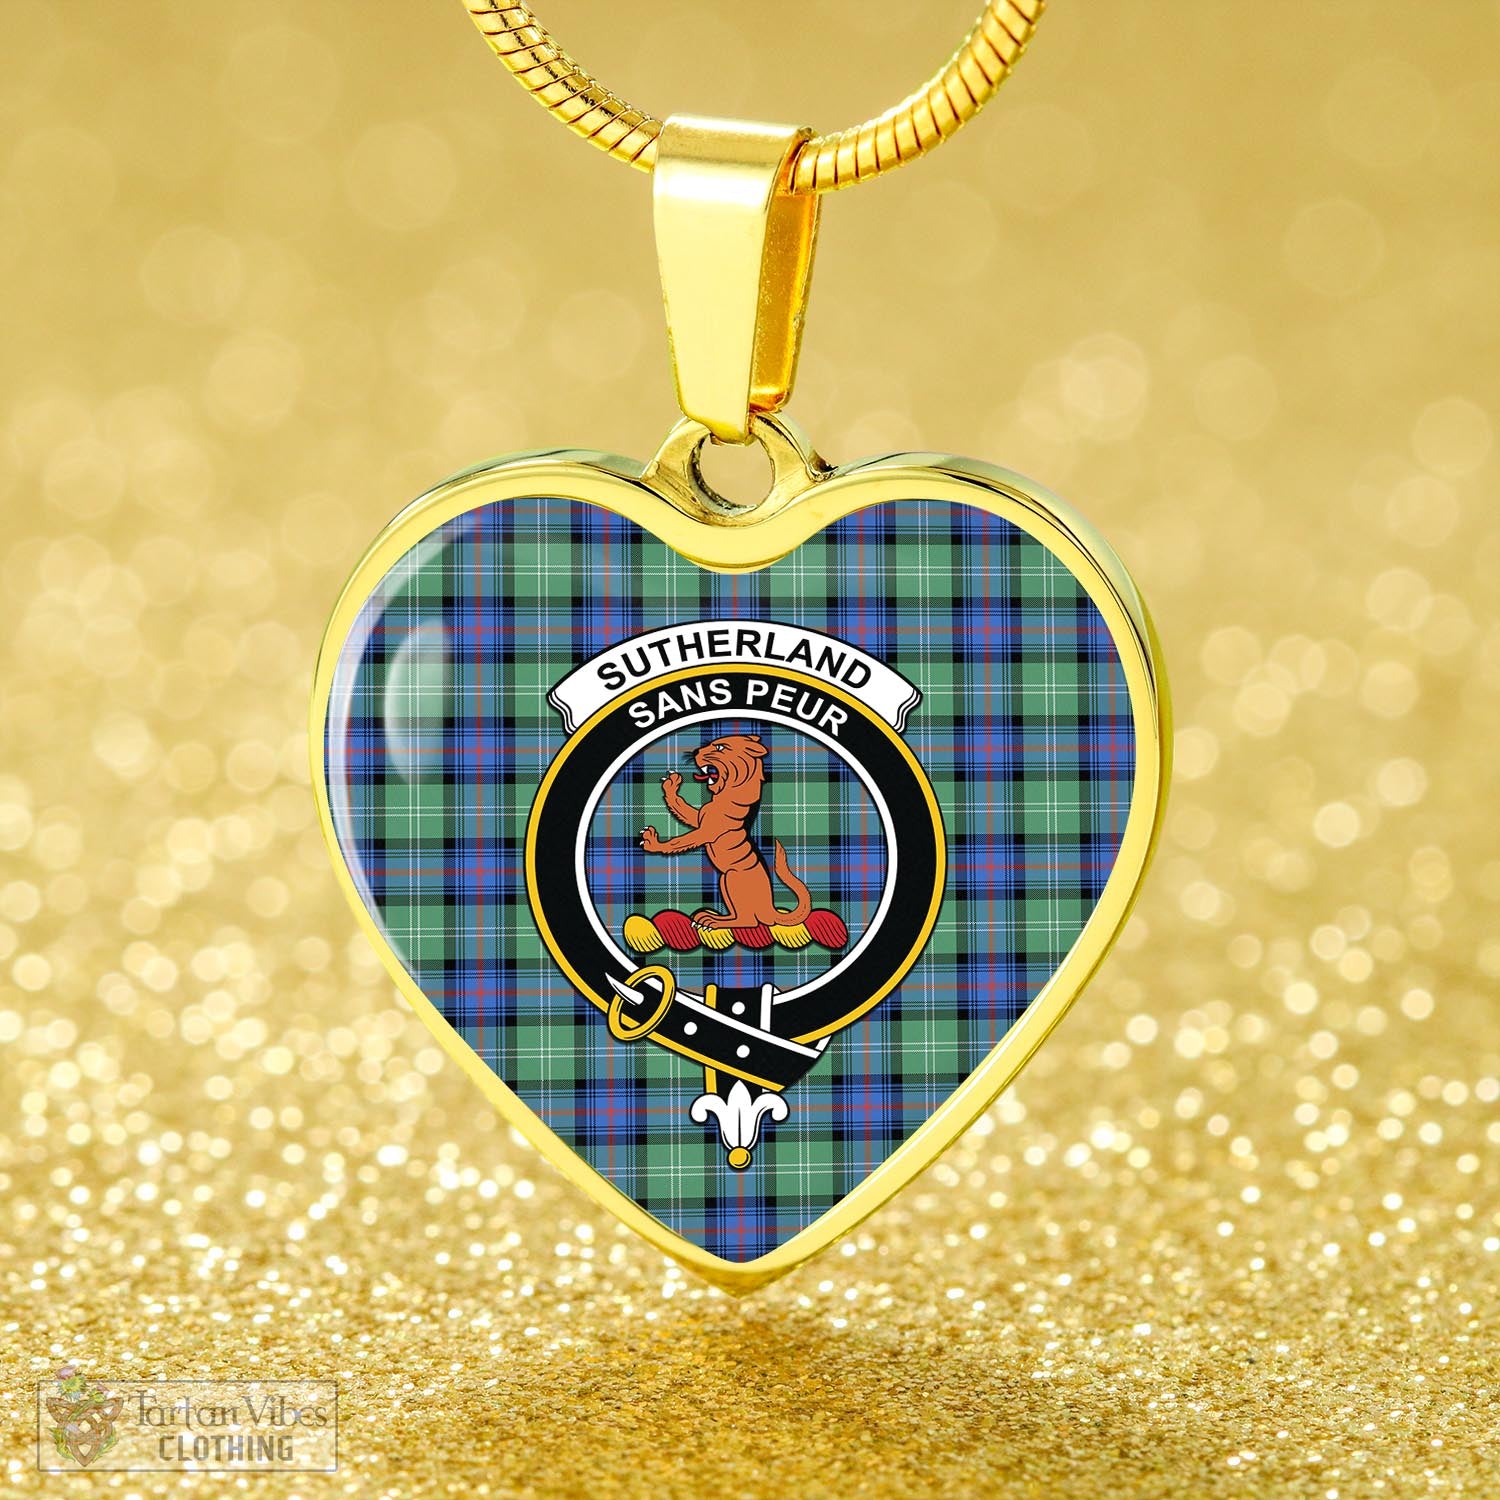 Tartan Vibes Clothing Sutherland Ancient Tartan Heart Necklace with Family Crest